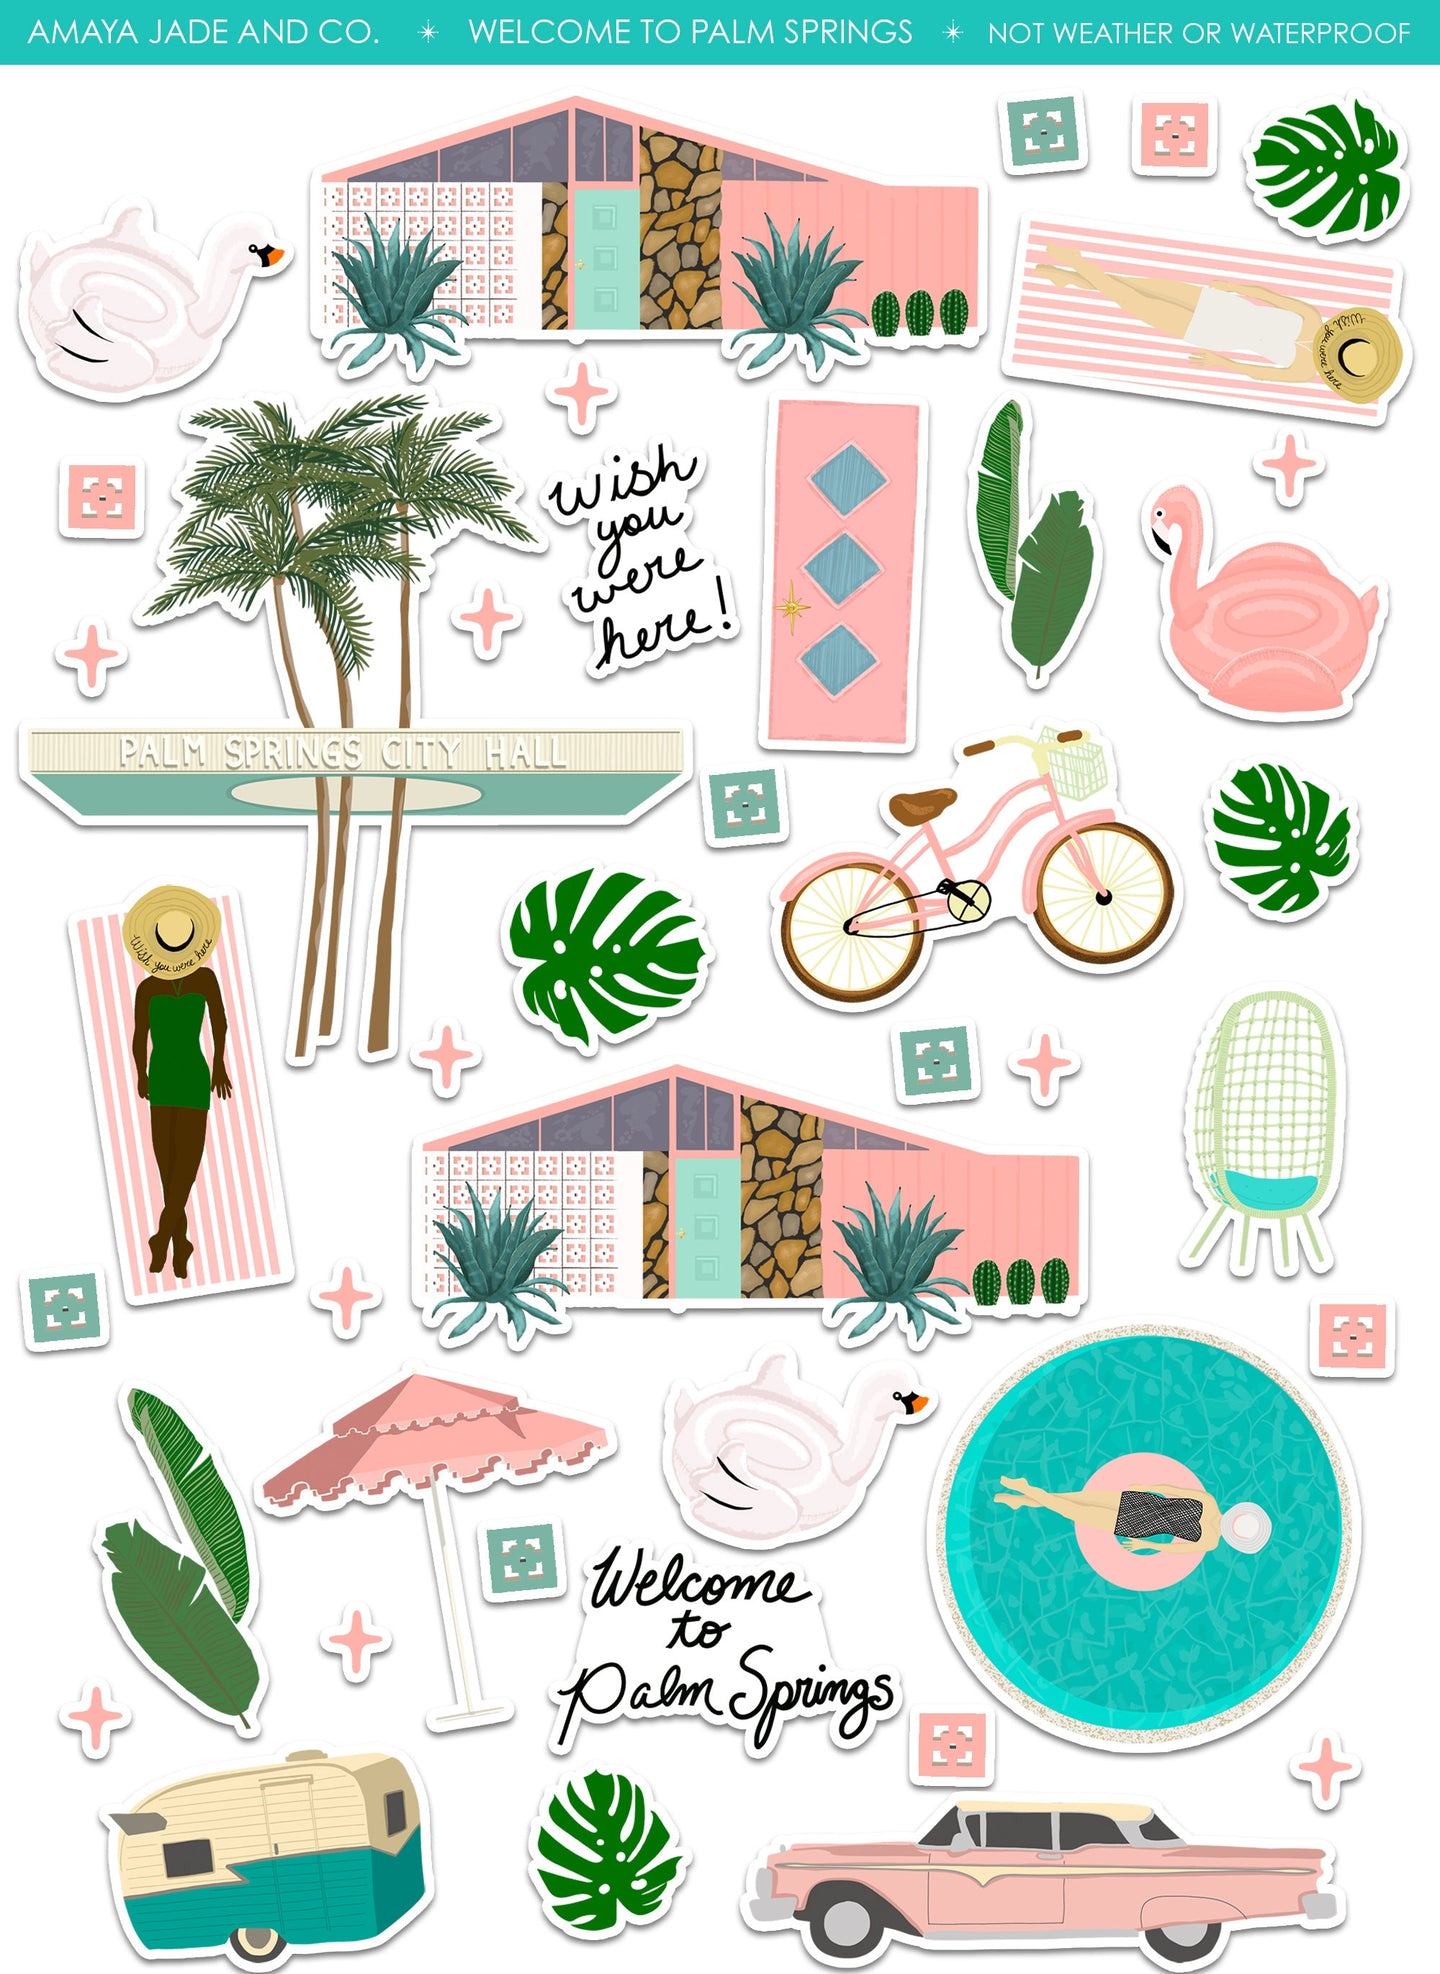 Welcome to Palm Springs Art Sticker Set